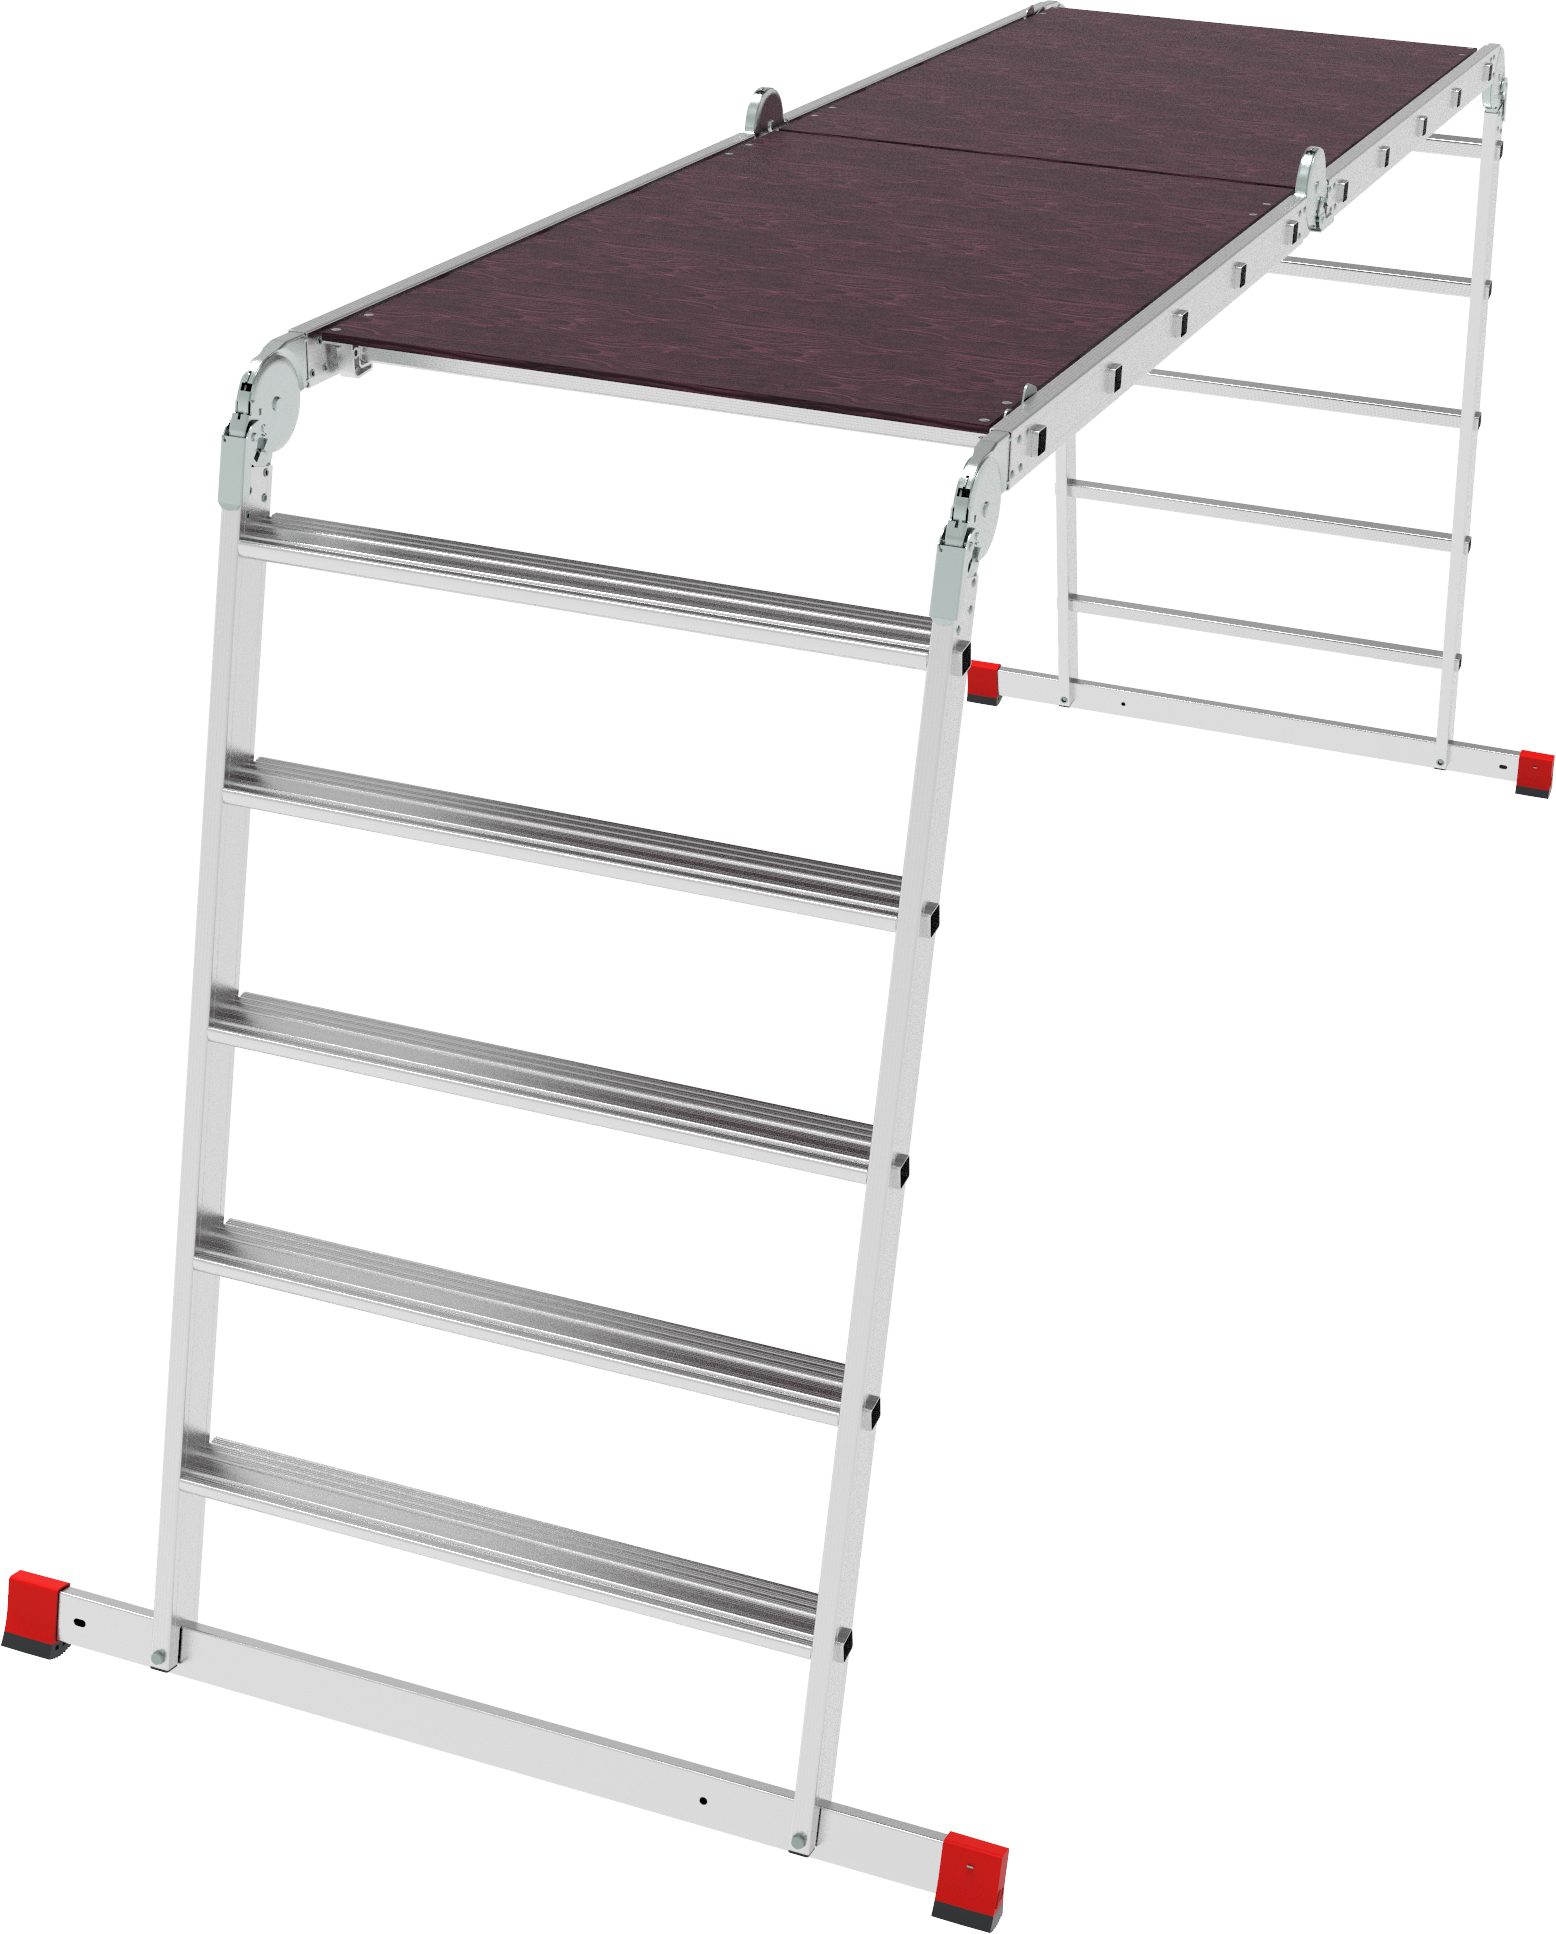 Multipurpose aluminum professional hinged rung ladder 800 mm width with 80 mm flanged steps and platform NV3336 sku 3336405